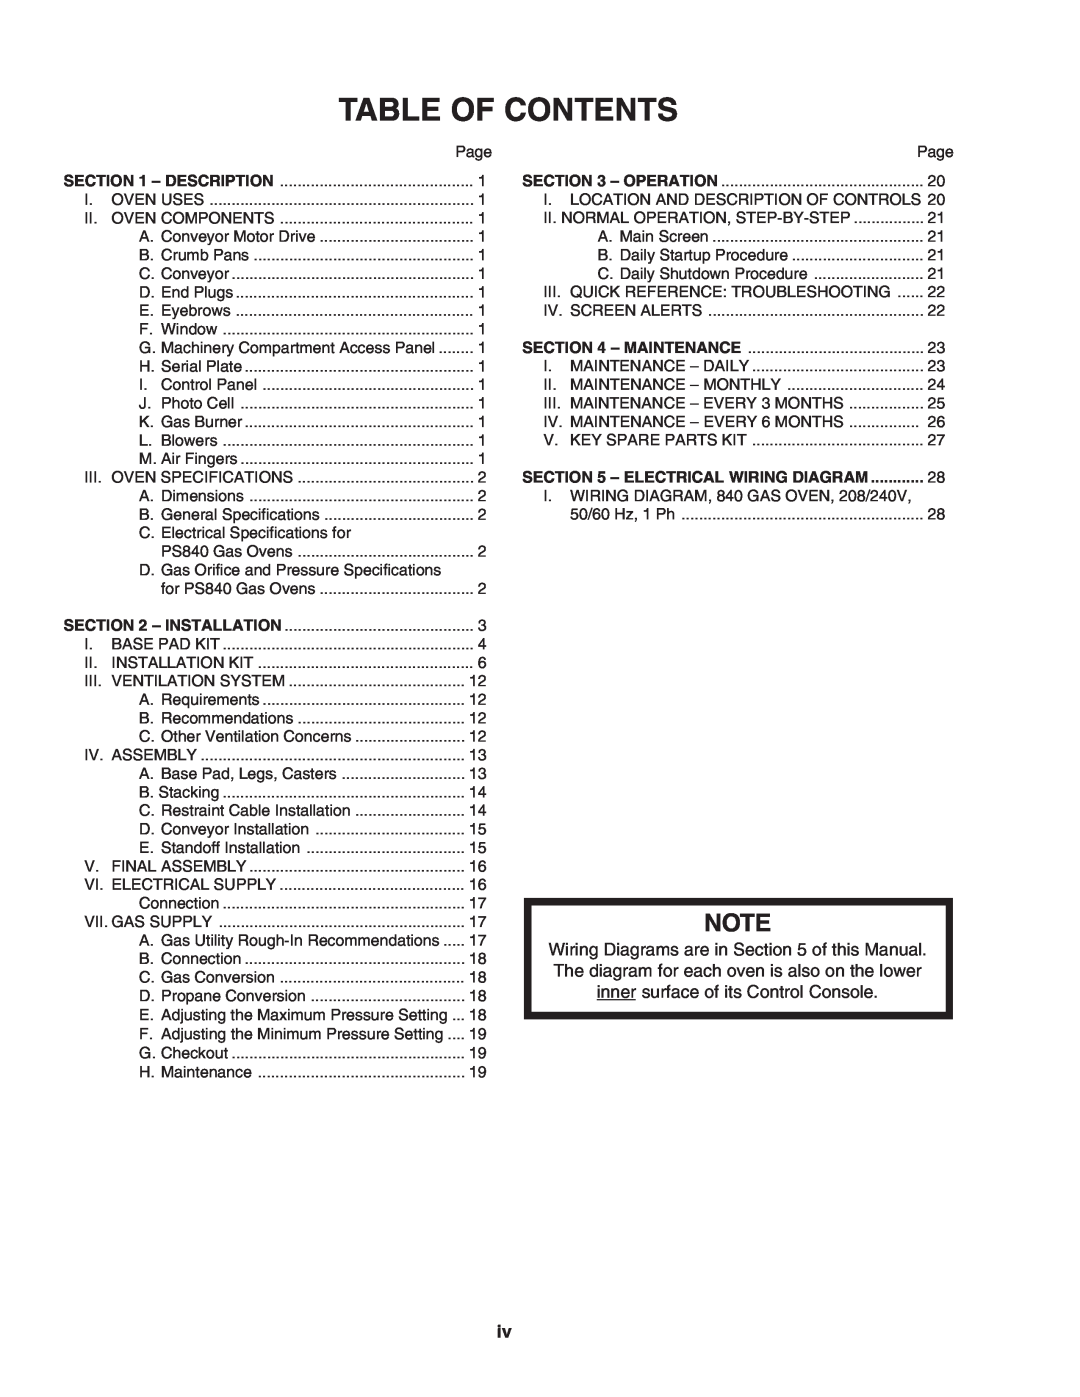 Middleby Marshall PS840 Series installation manual Table Of Contents, Operation, Electrical Wiring Diagram 